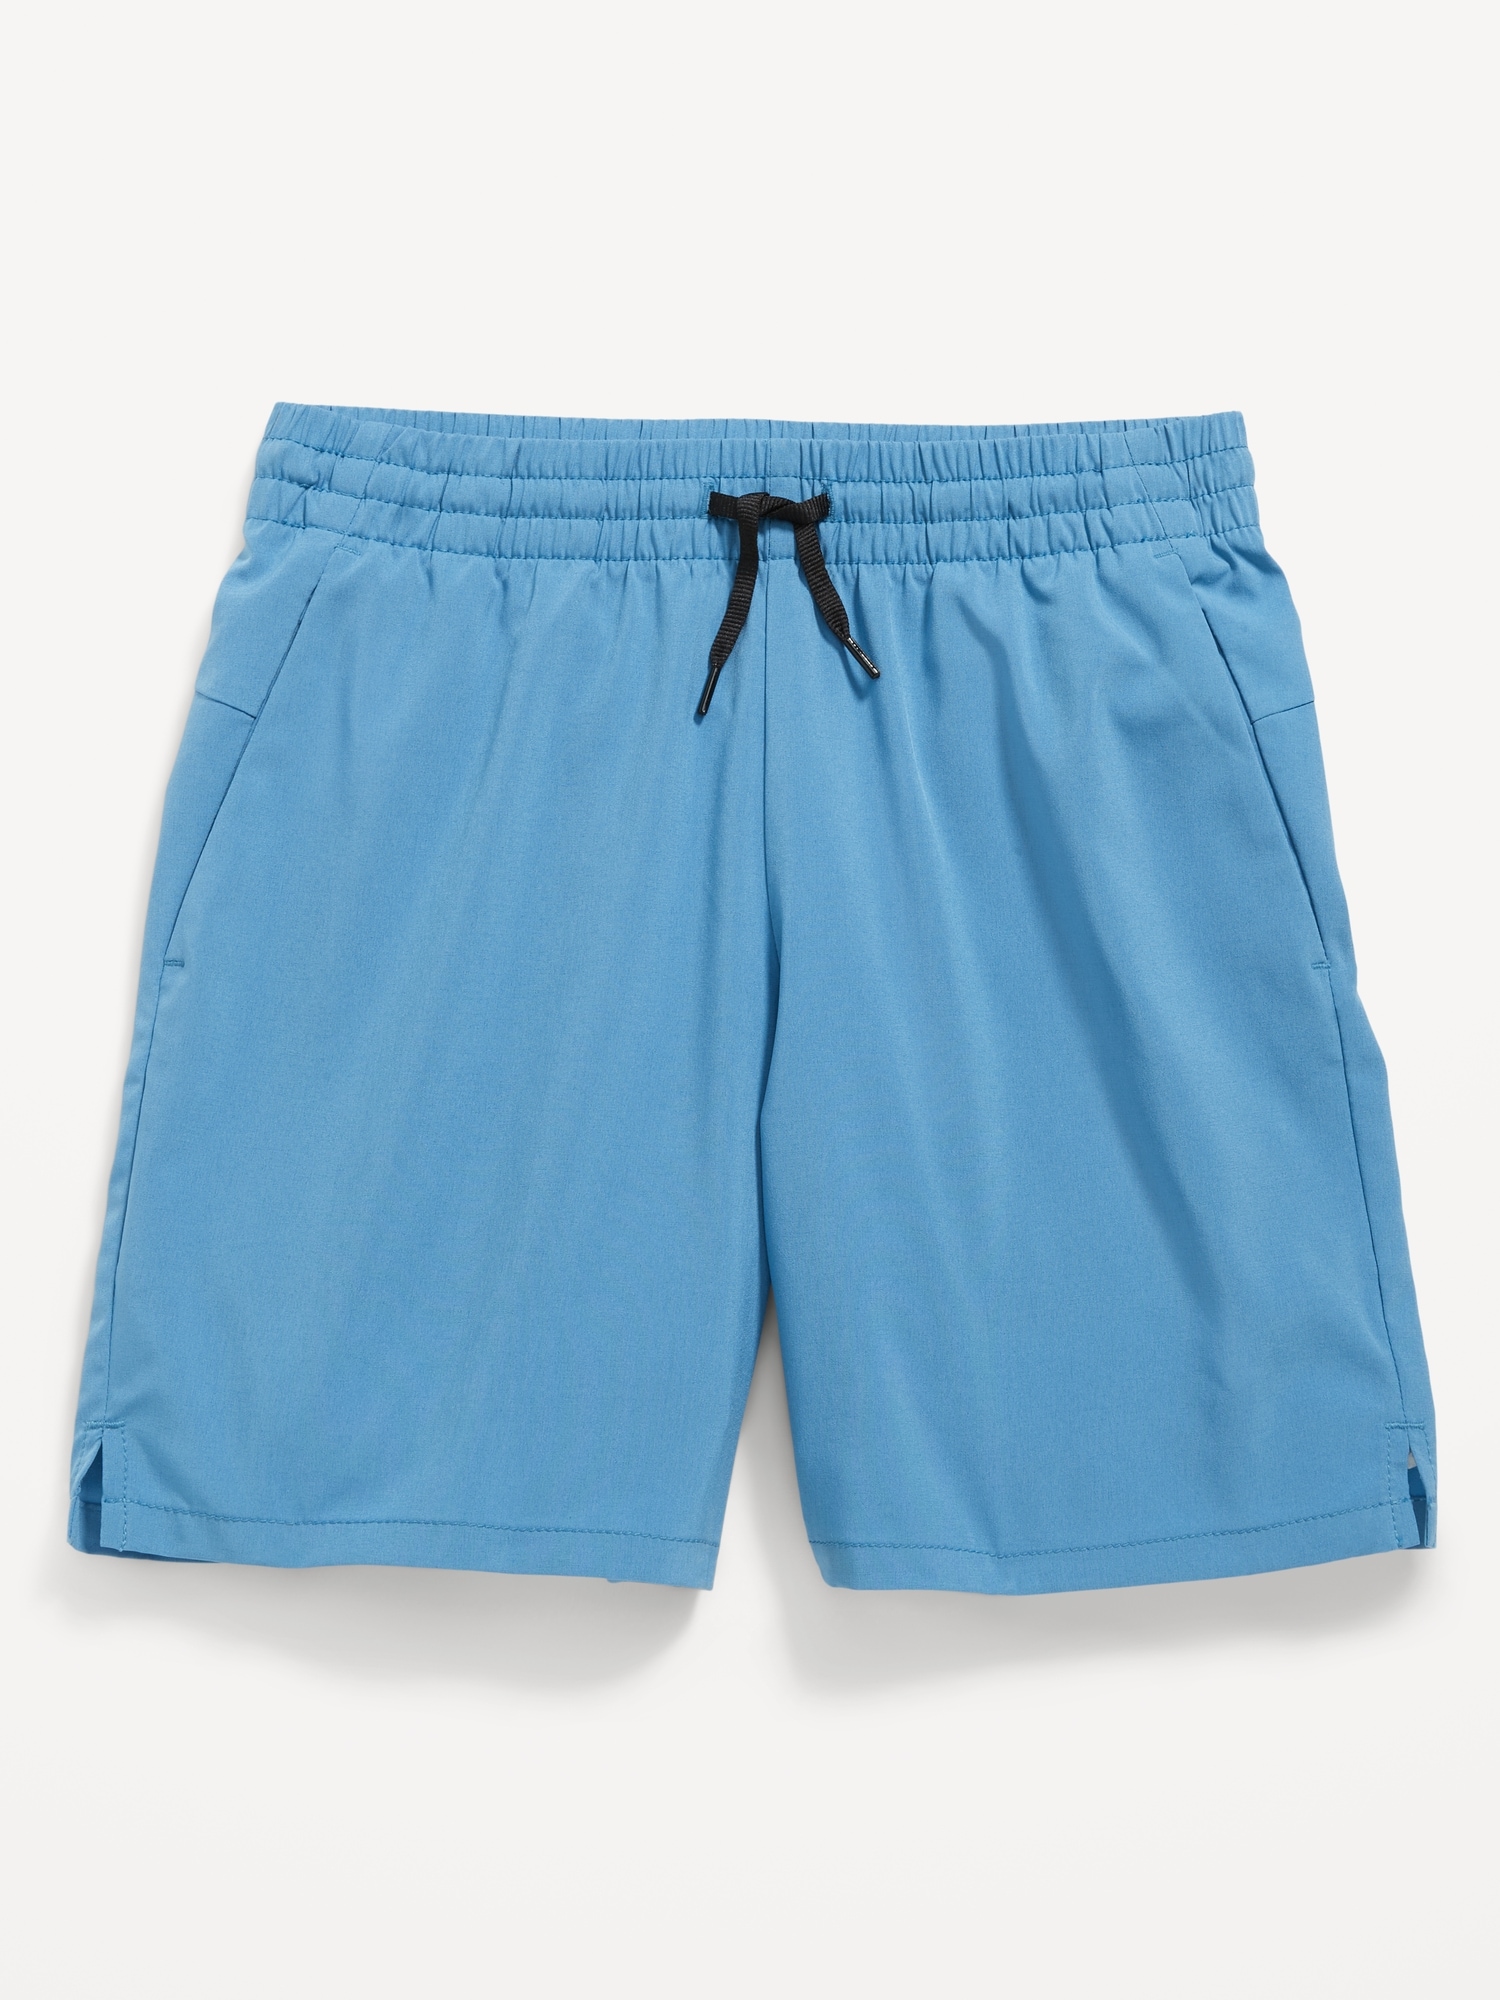 Old Navy Go-Dry Mesh Performance Shorts for Boys yellow - 678822023